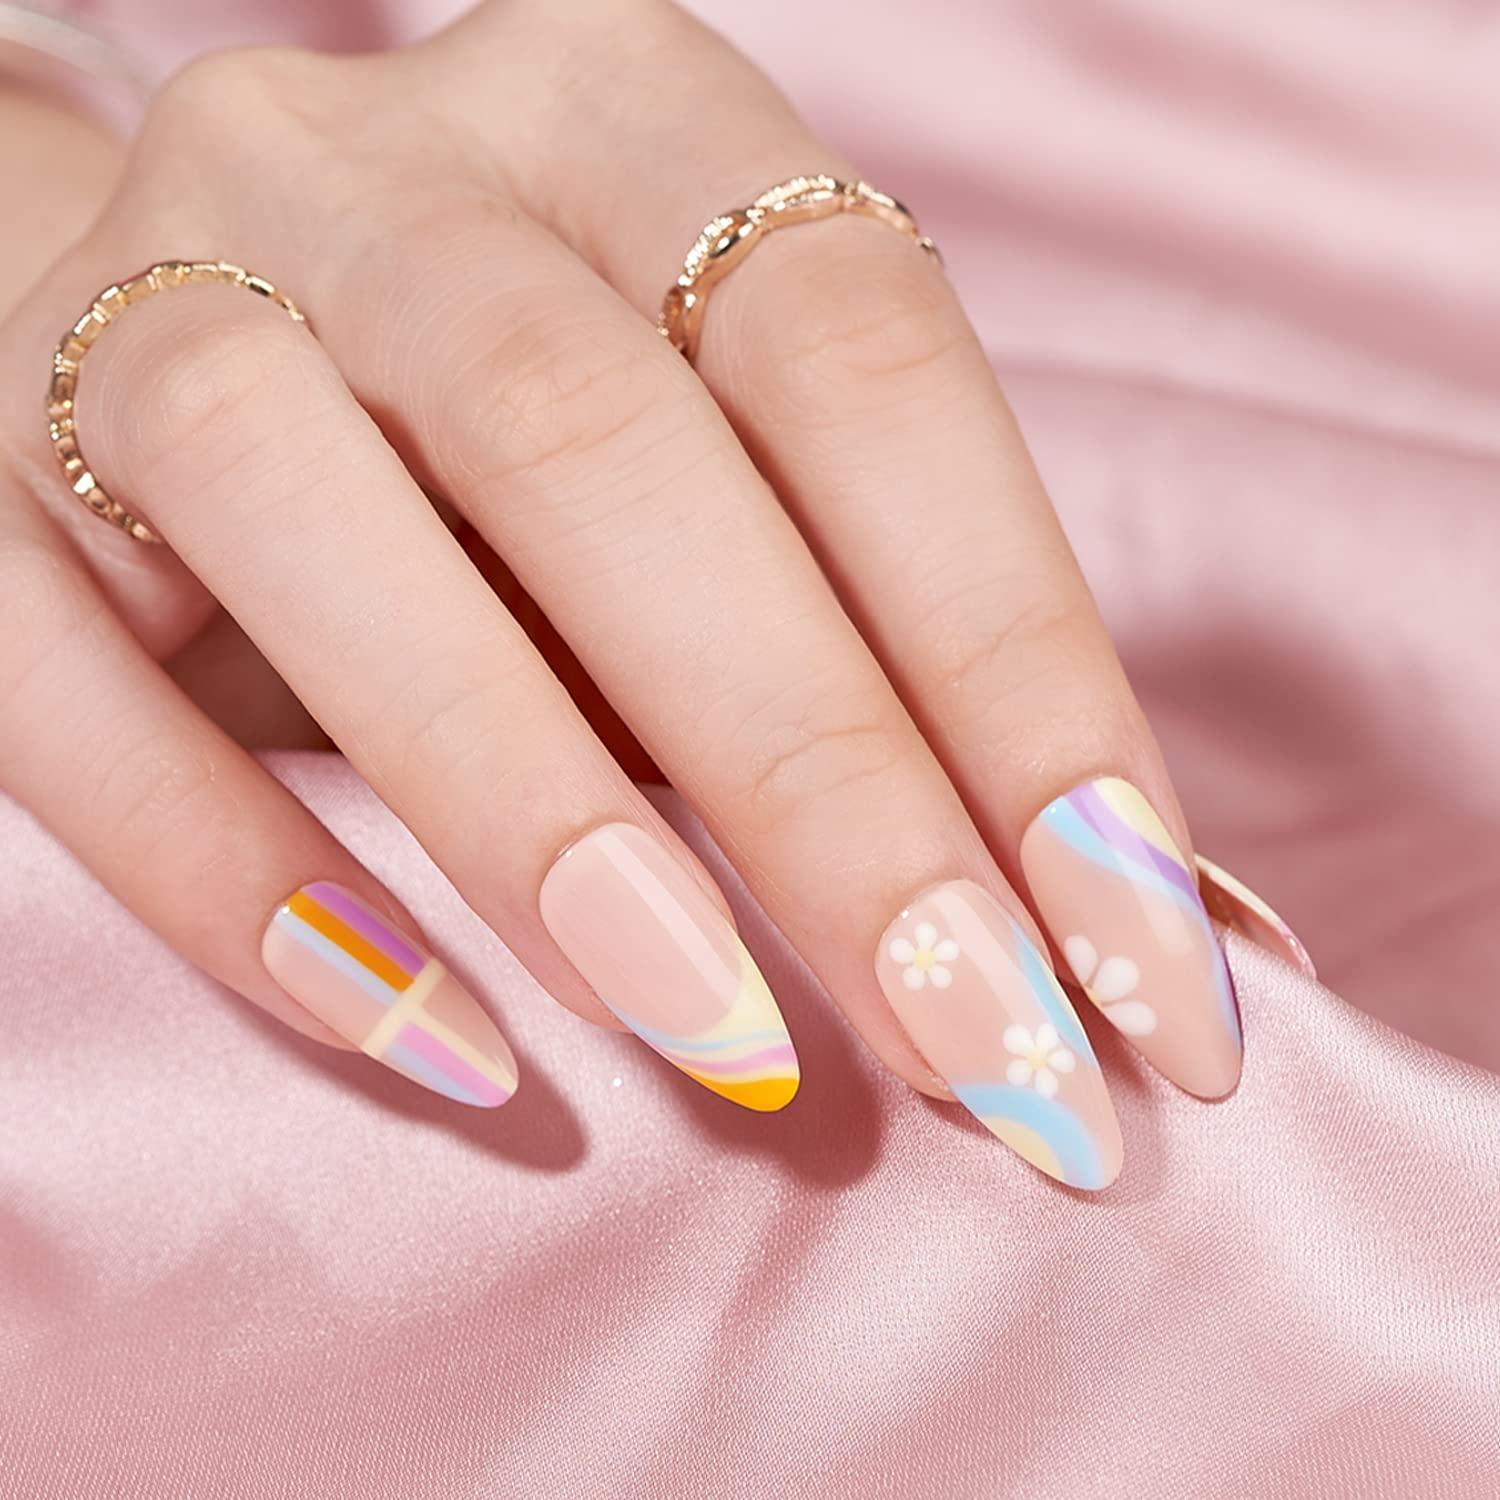 Almond Shaped Fake Nails Medium Press on Nails with Gold Foil and Swirl  Designs Acrylic Nails Cute French Nails with Glue Summer Glossy Stick on  Nails for Women and Girls 24pcs AL21